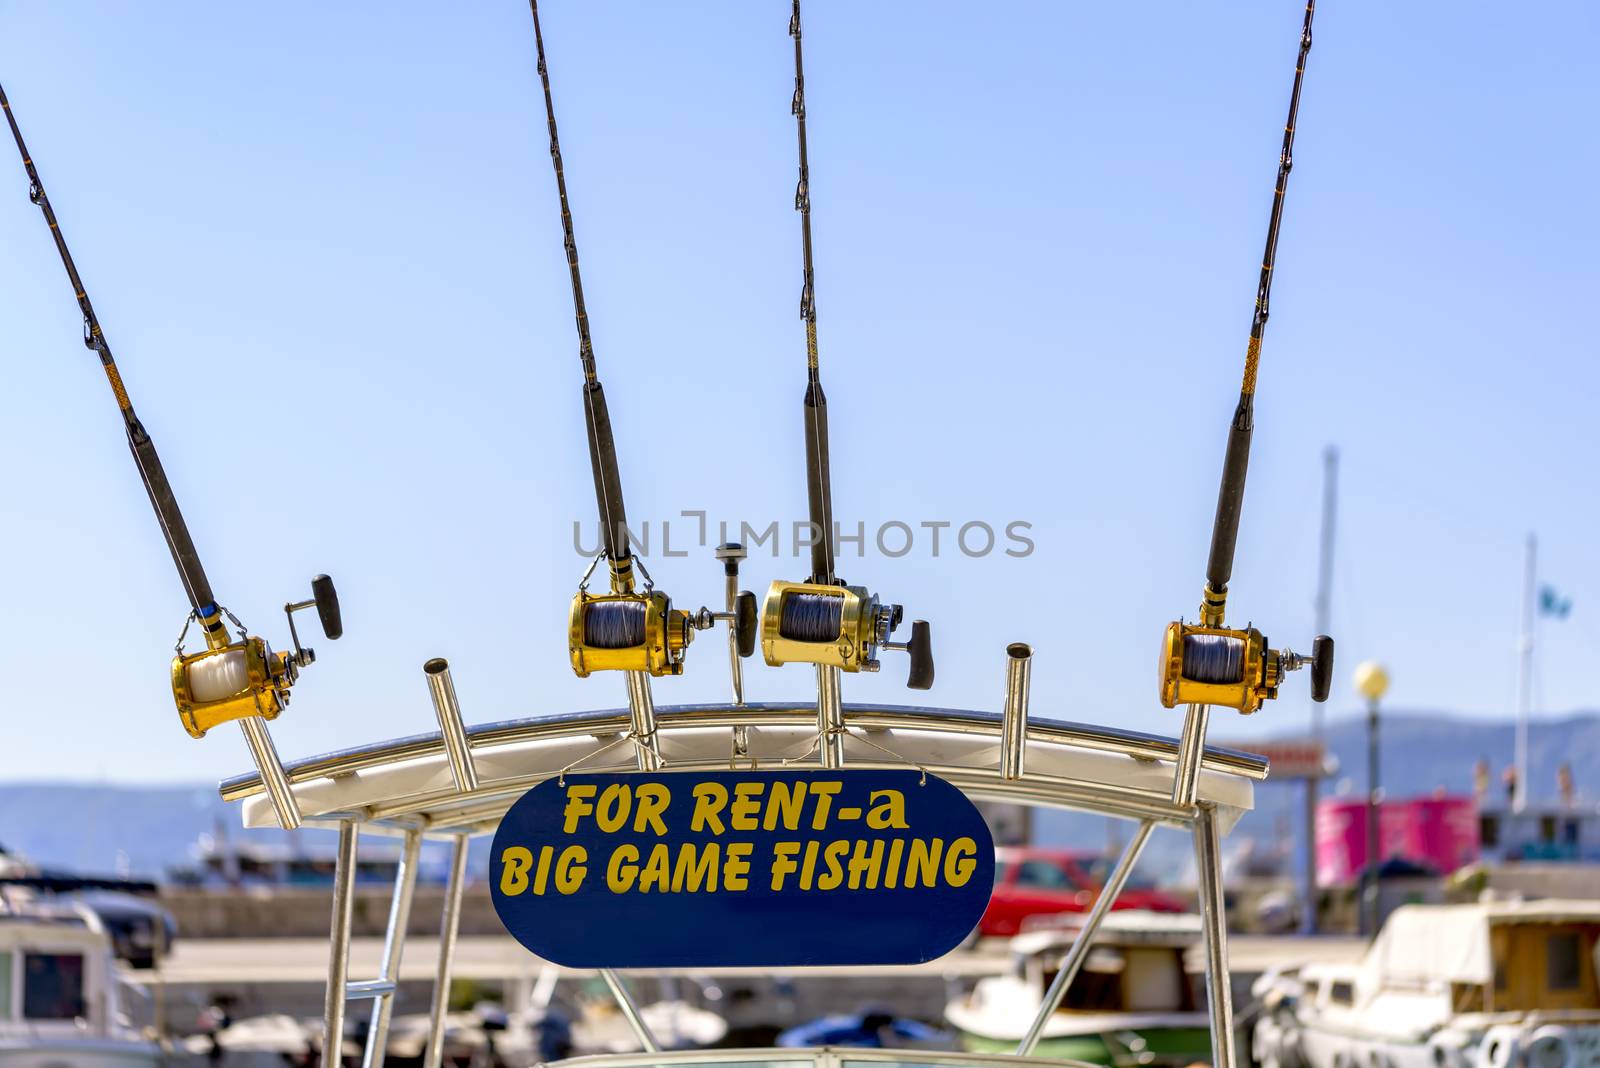 Big game fishing boat and equipment for rent by asafaric